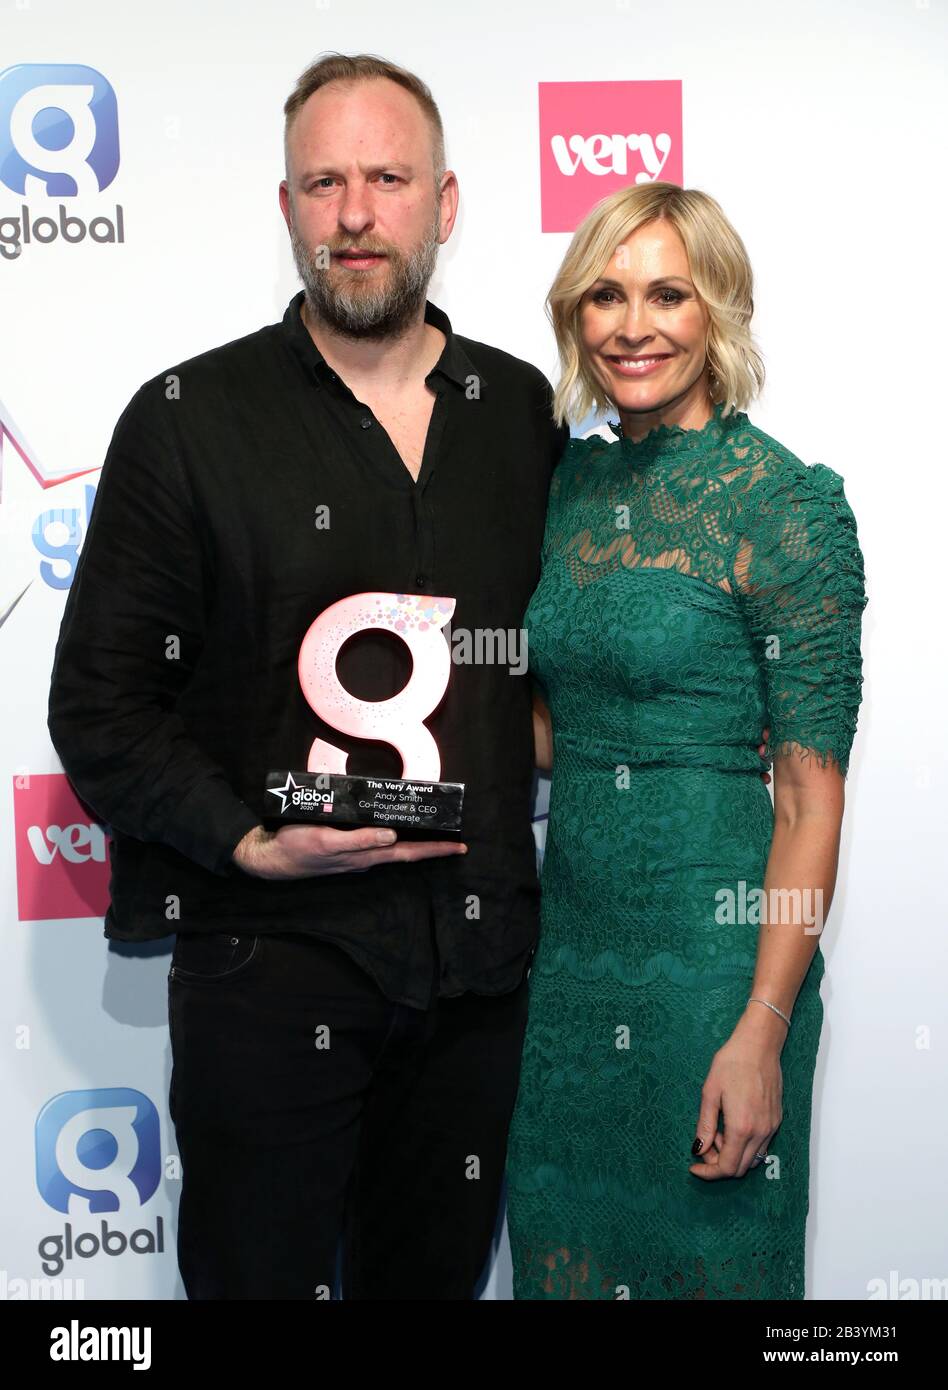 Jenni Falconer (right) with Andy Smith winner of The Very Award at The Global Awards 2020 with Very.co.uk at London's Eventim Apollo Hammersmith. Stock Photo